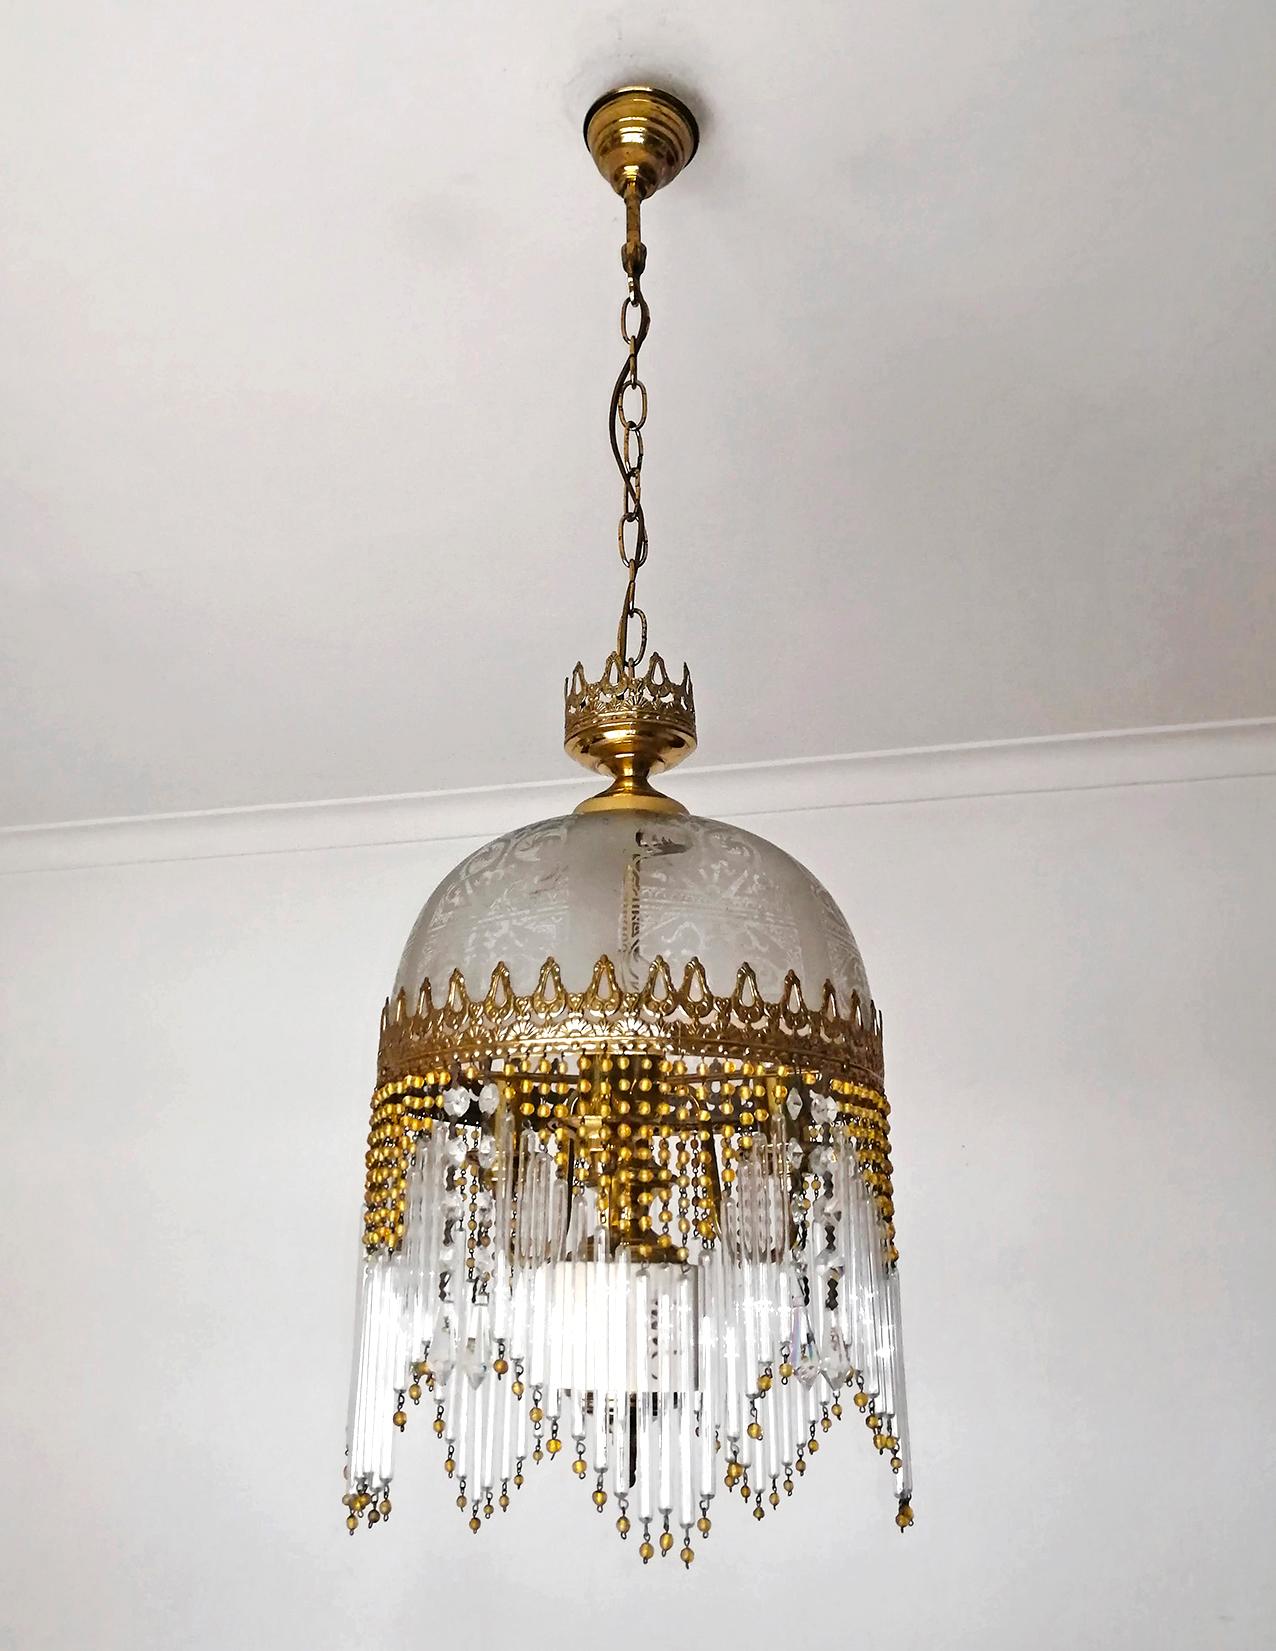 Italian Art Deco & Art Nouveau Amber Beaded Clear Glass Fringe Murano Chandelier In Good Condition For Sale In Coimbra, PT